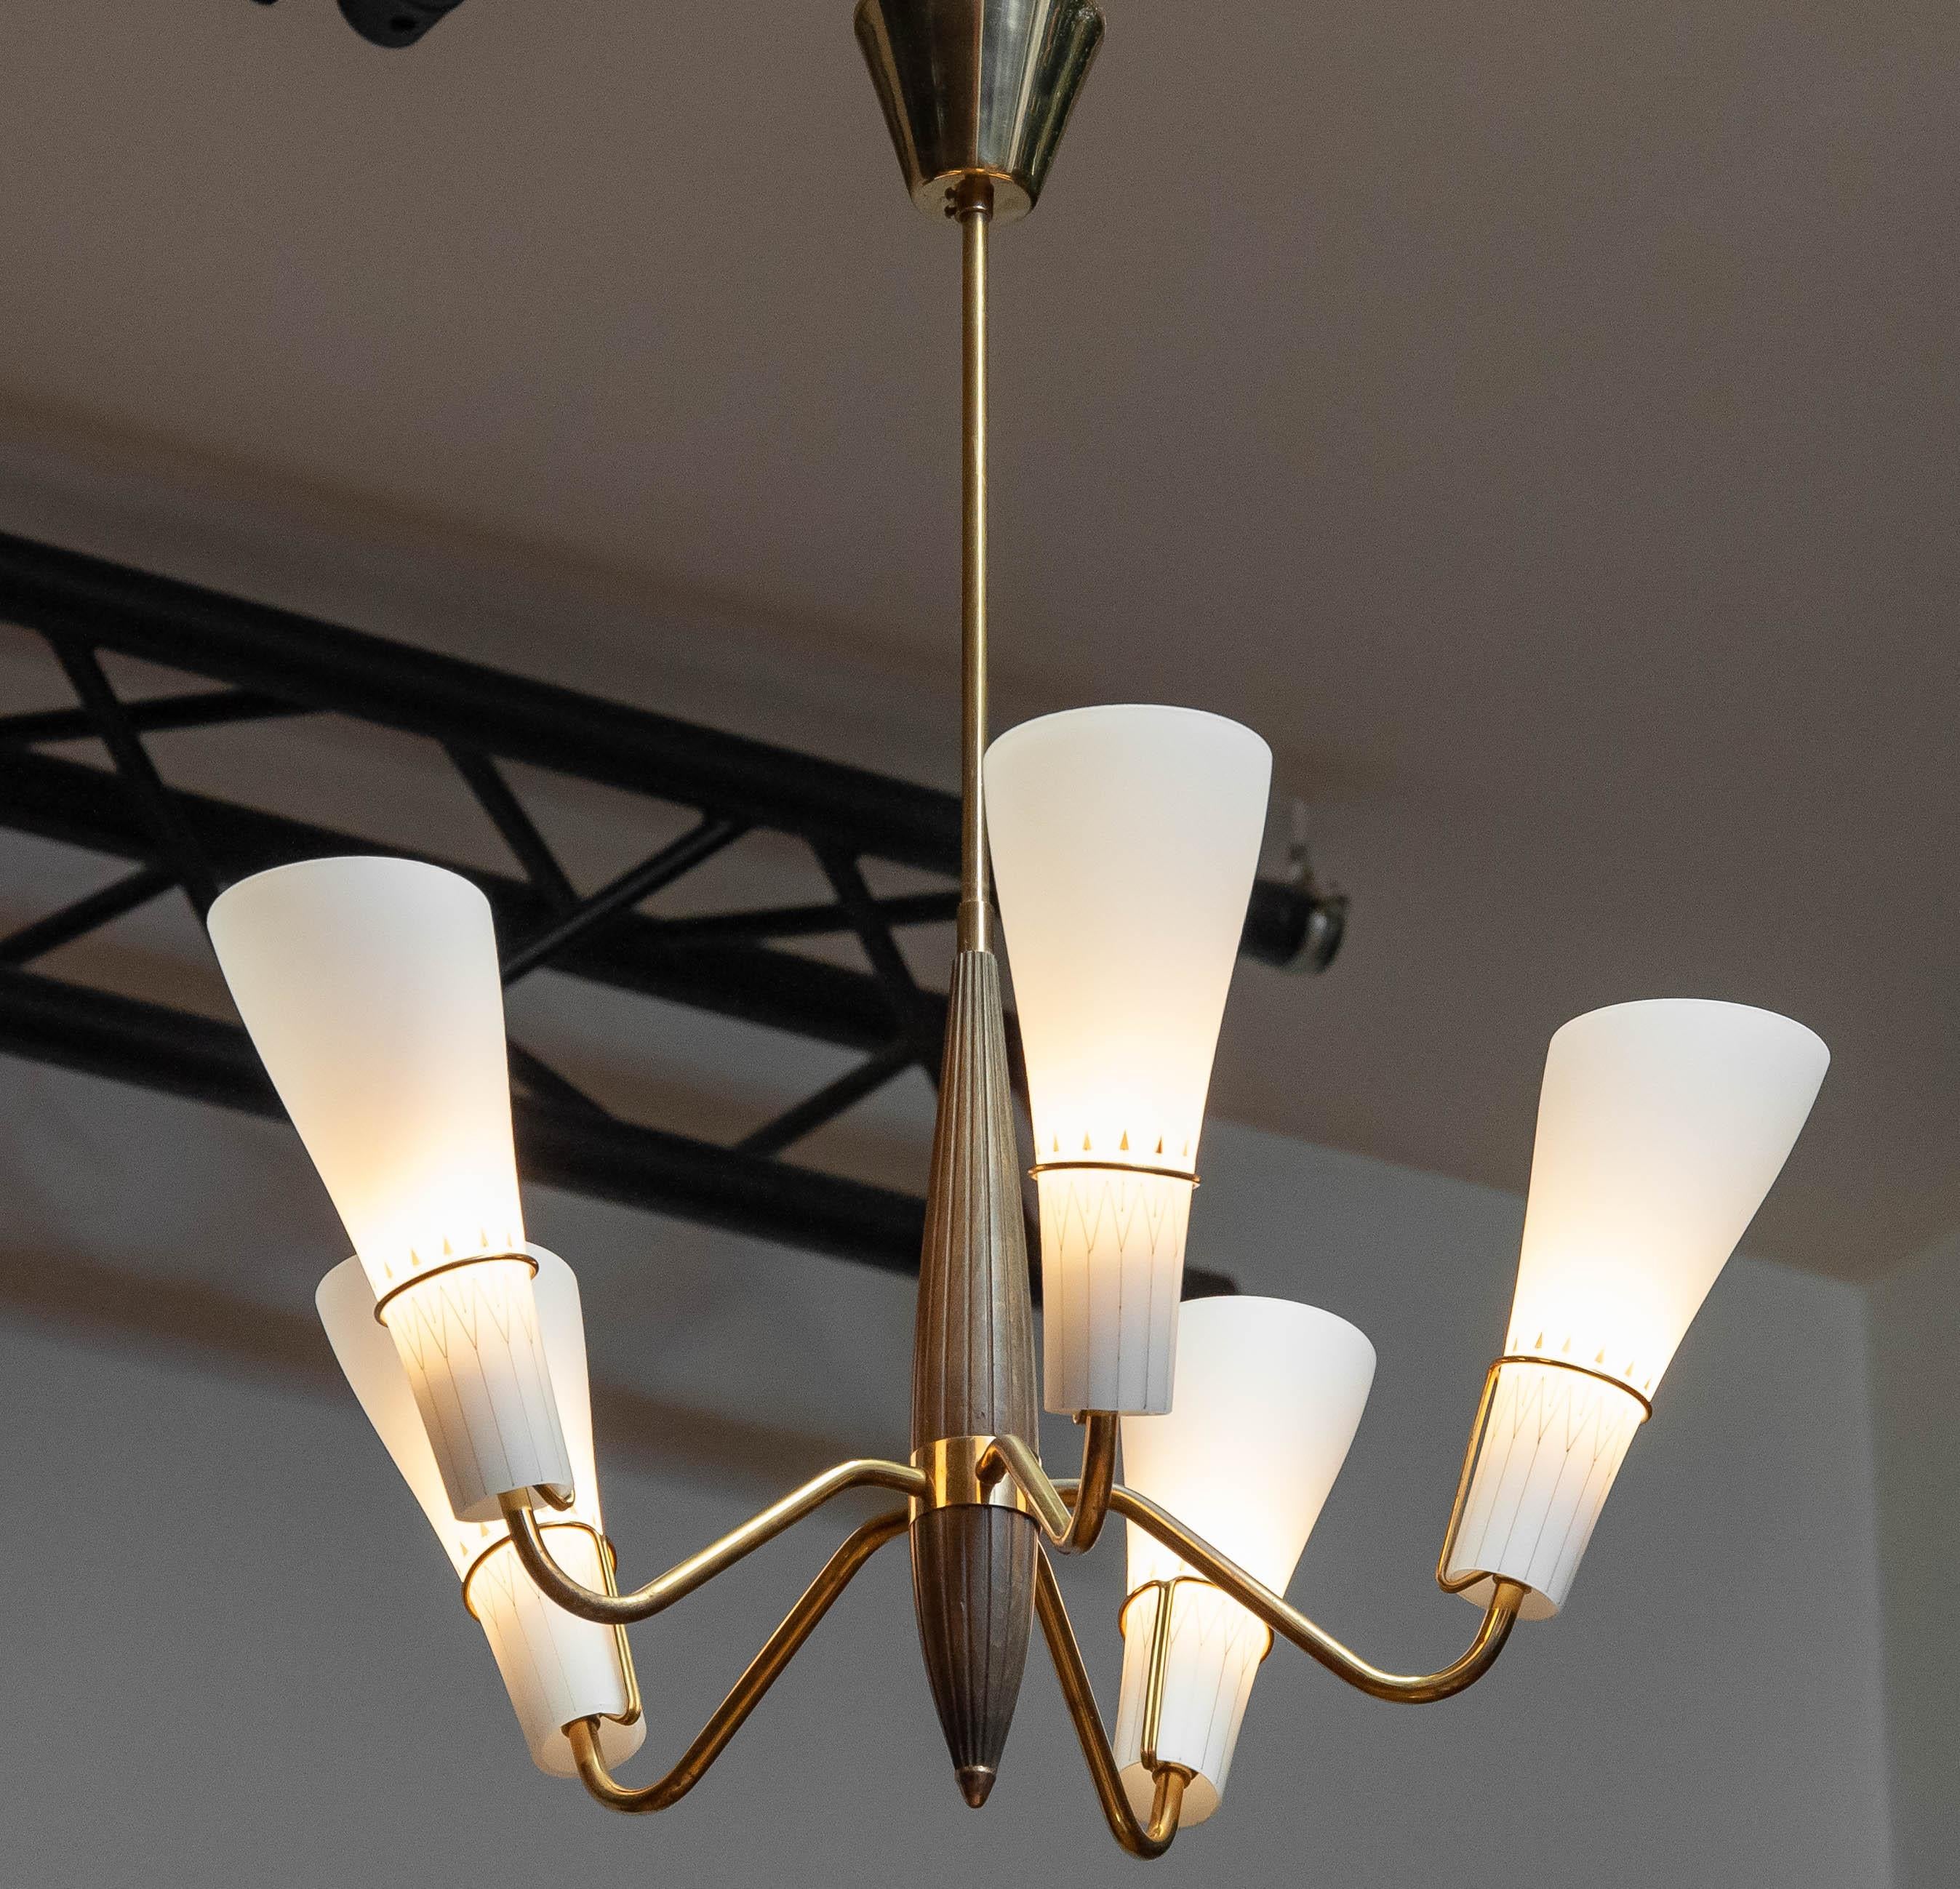 1950s Swedish Brass With Beech Five Arm Chandelier With Frosted Art Glass Shades In Good Condition For Sale In Silvolde, Gelderland